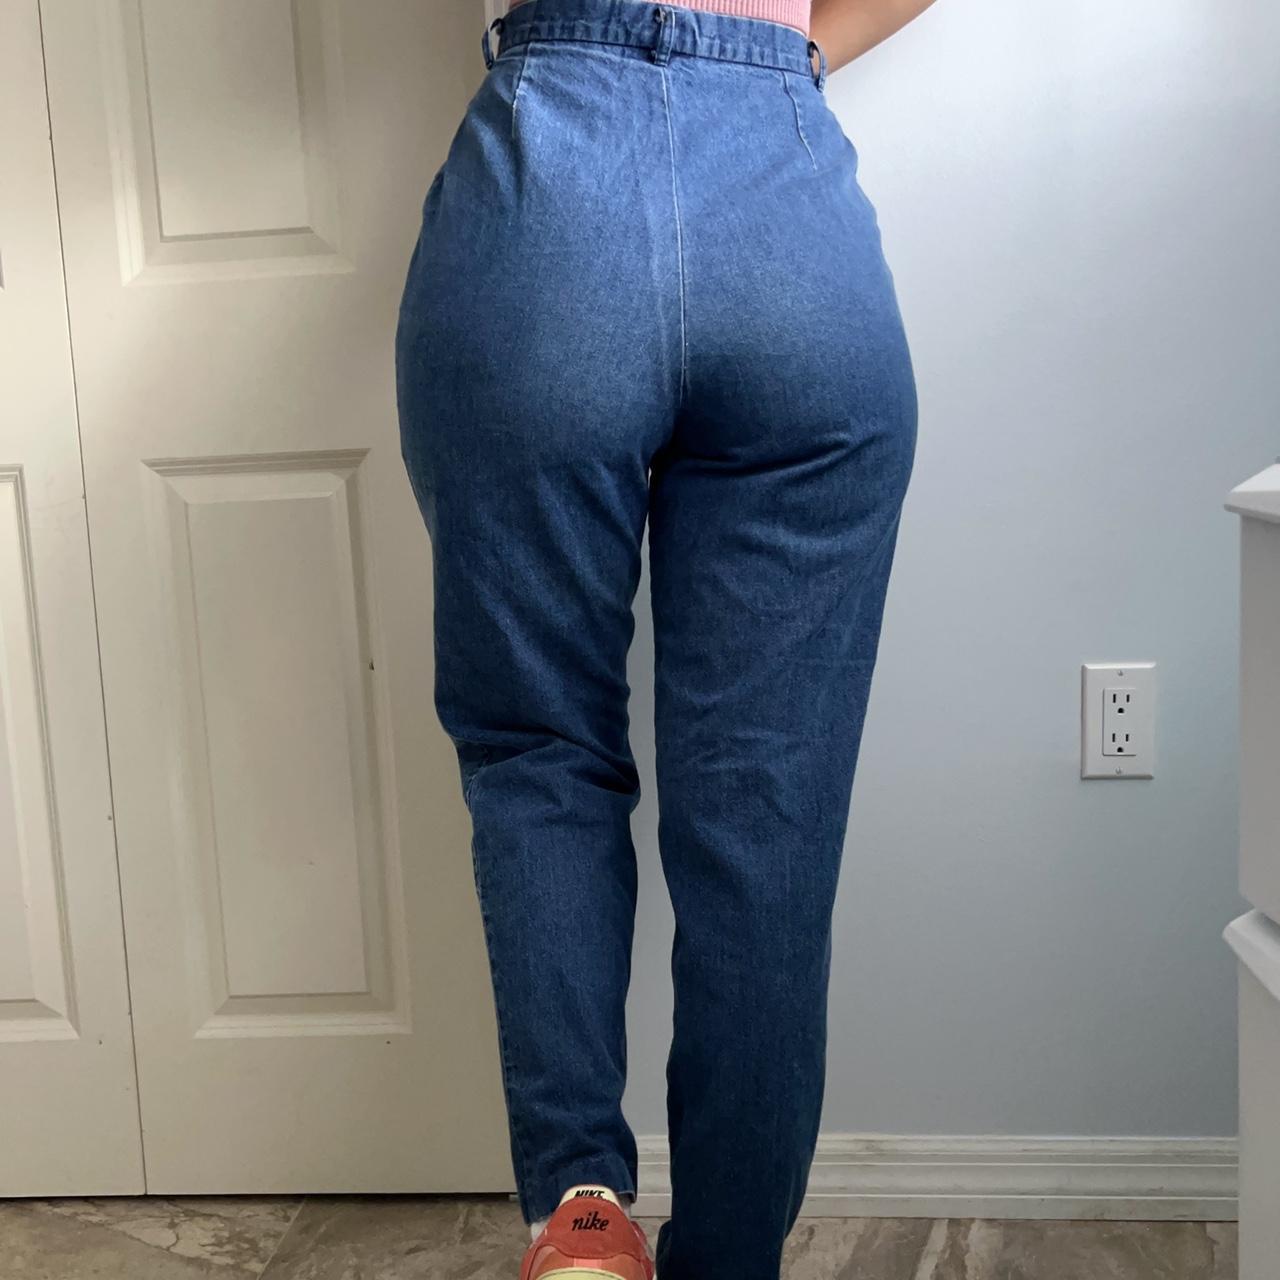 Chic Women's Blue and Navy Jeans (5)